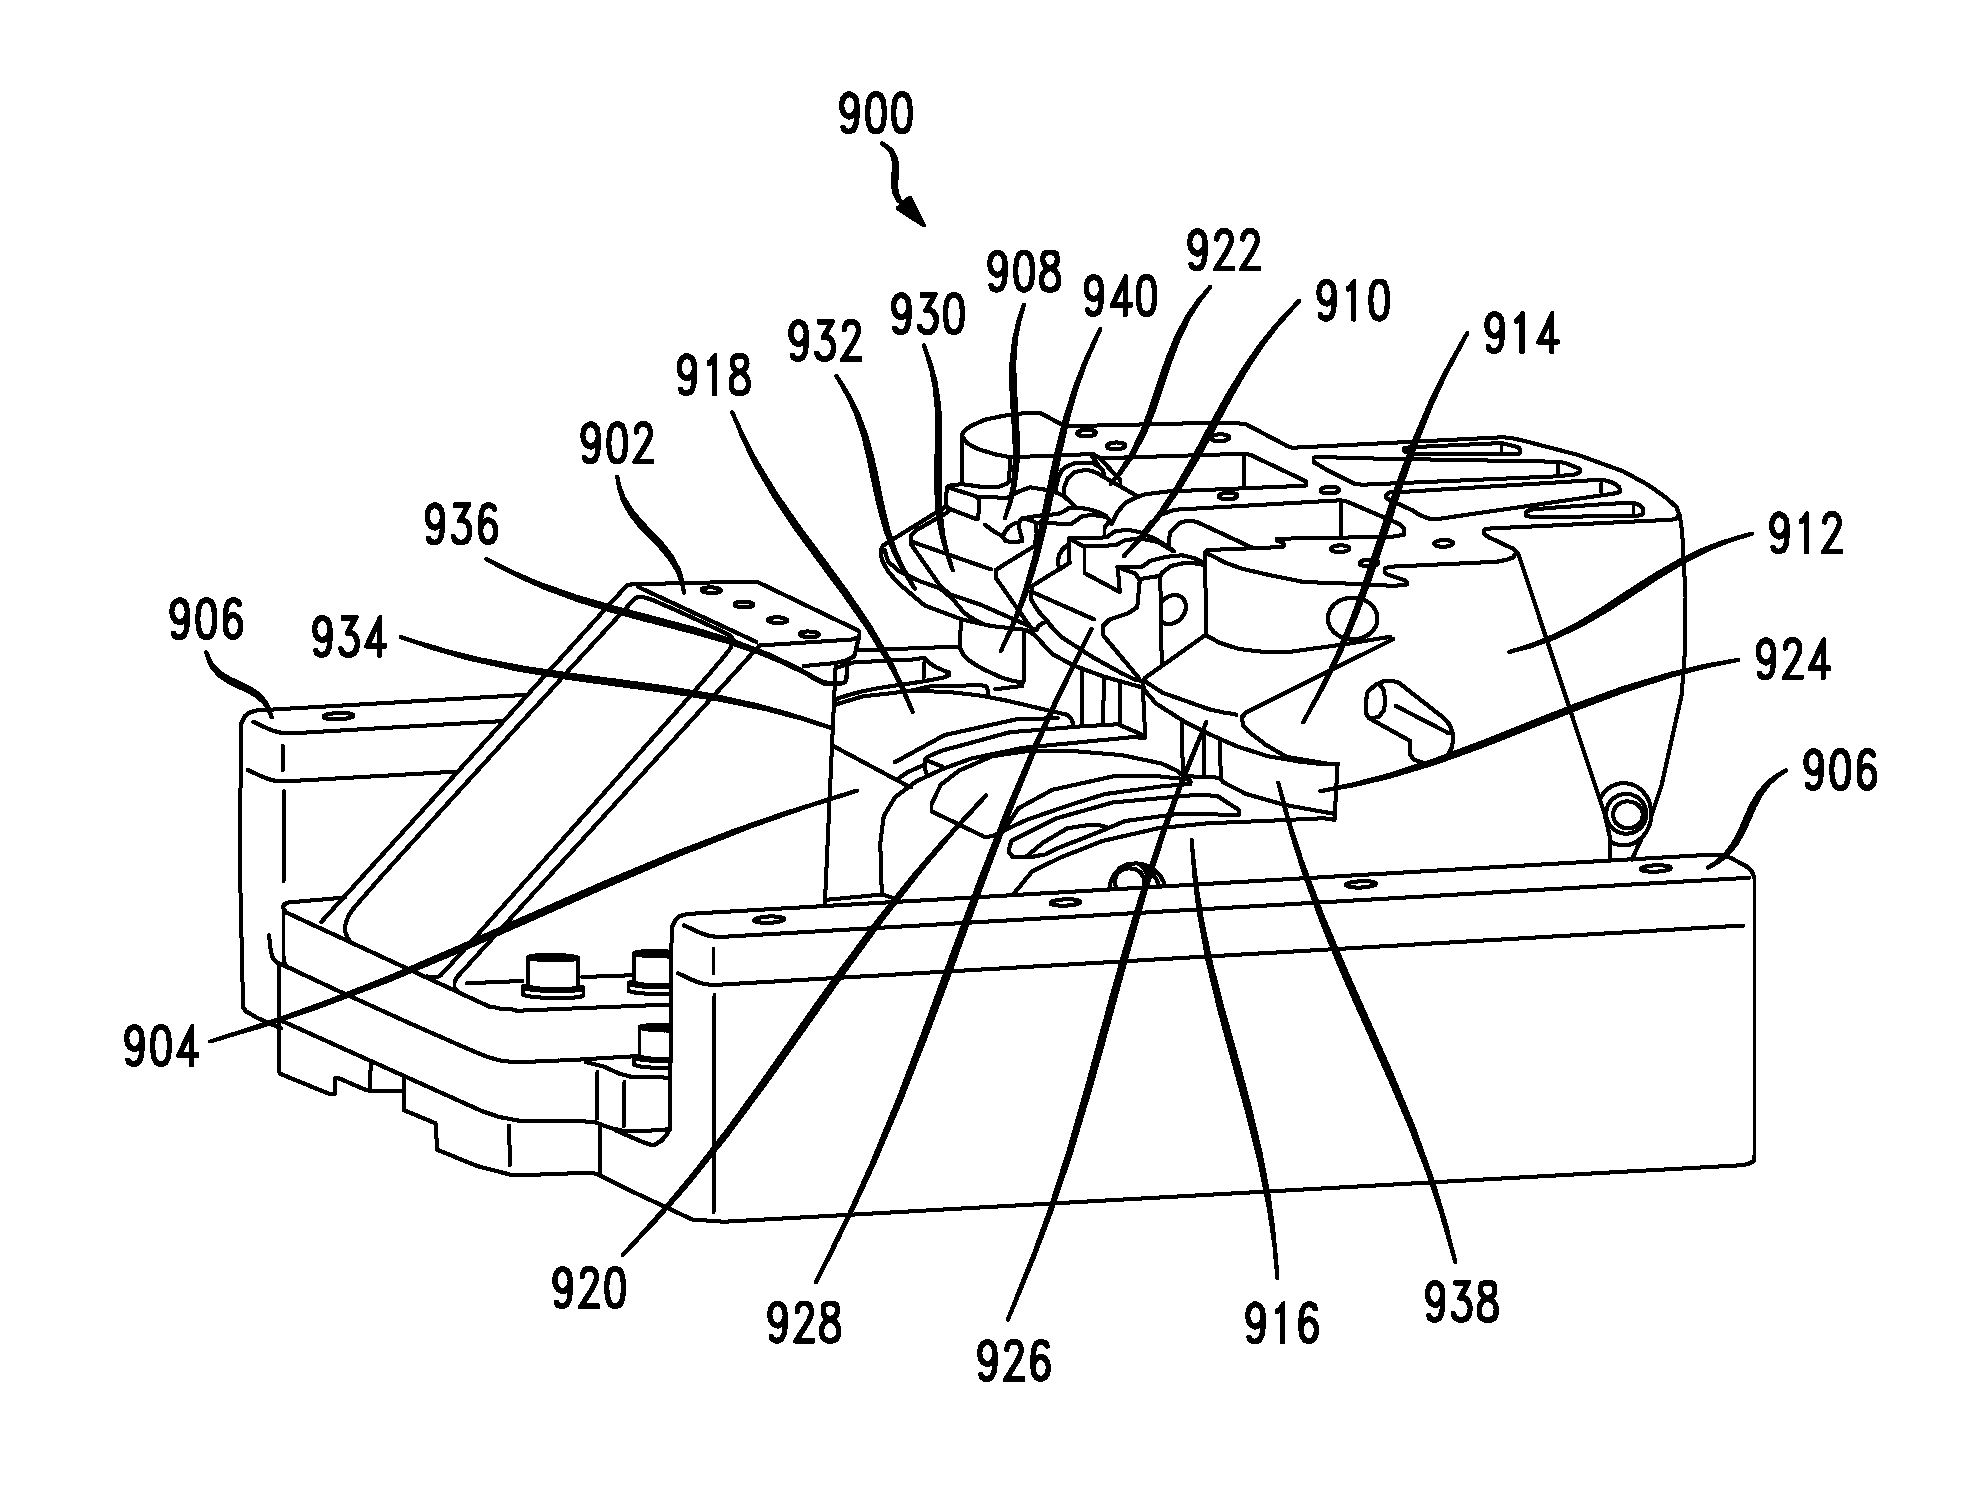 The final design constrains gripper travel using a pair of bearing